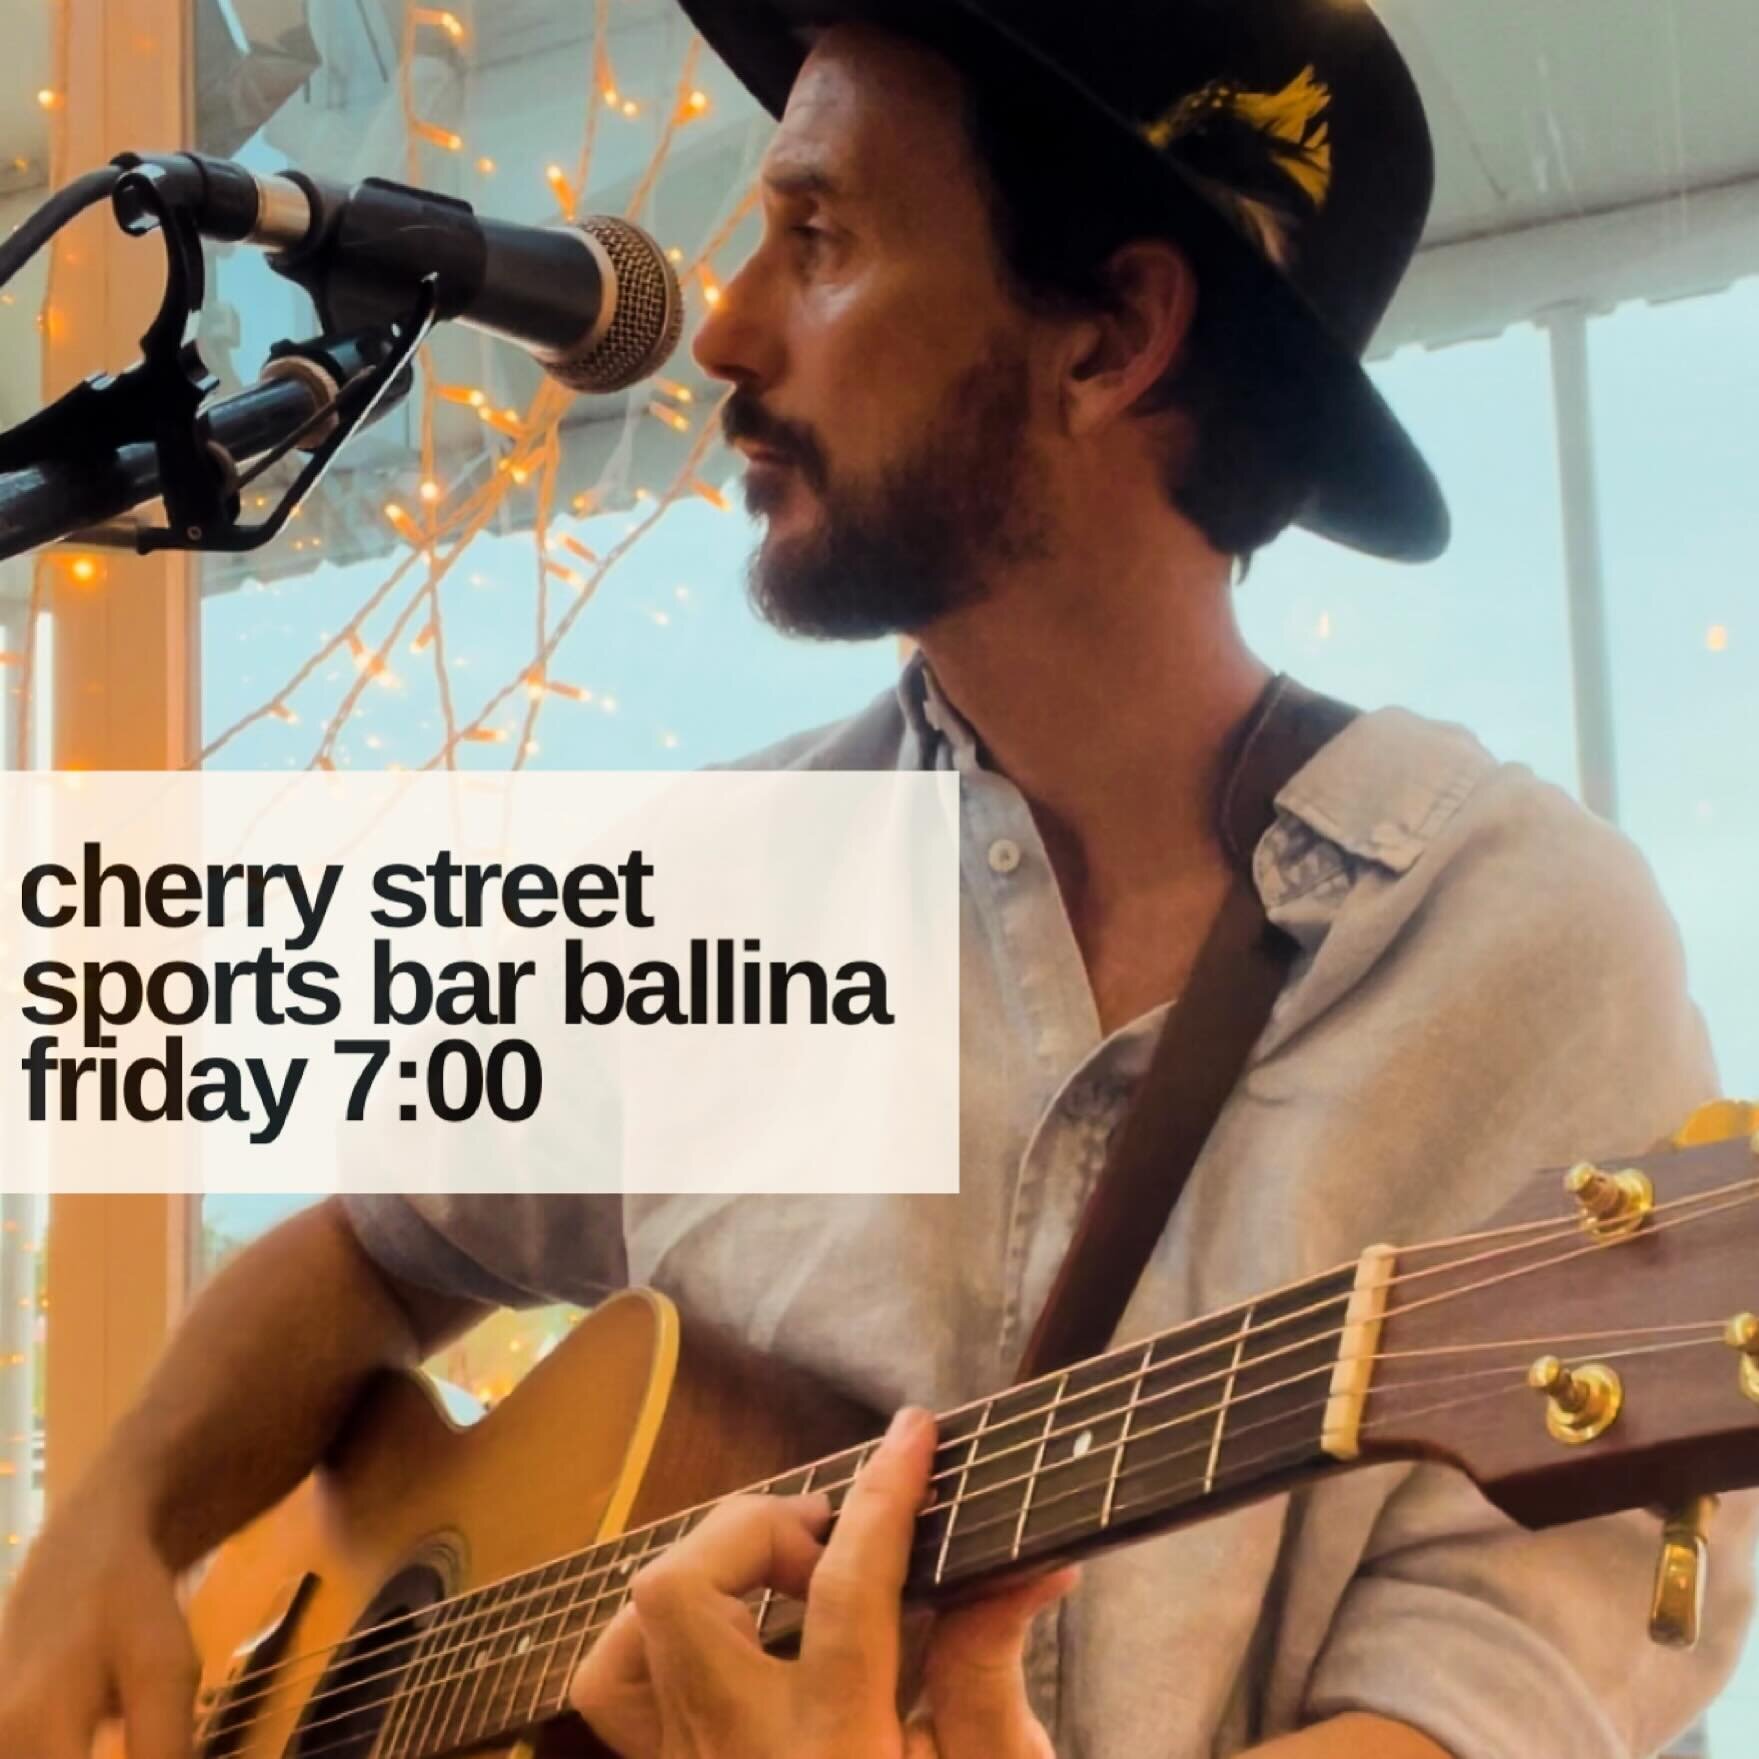 Come and join me at the @cherrystreetsports in Ballina this Friday from 7:00pm for live music and good vibes 🎼✨